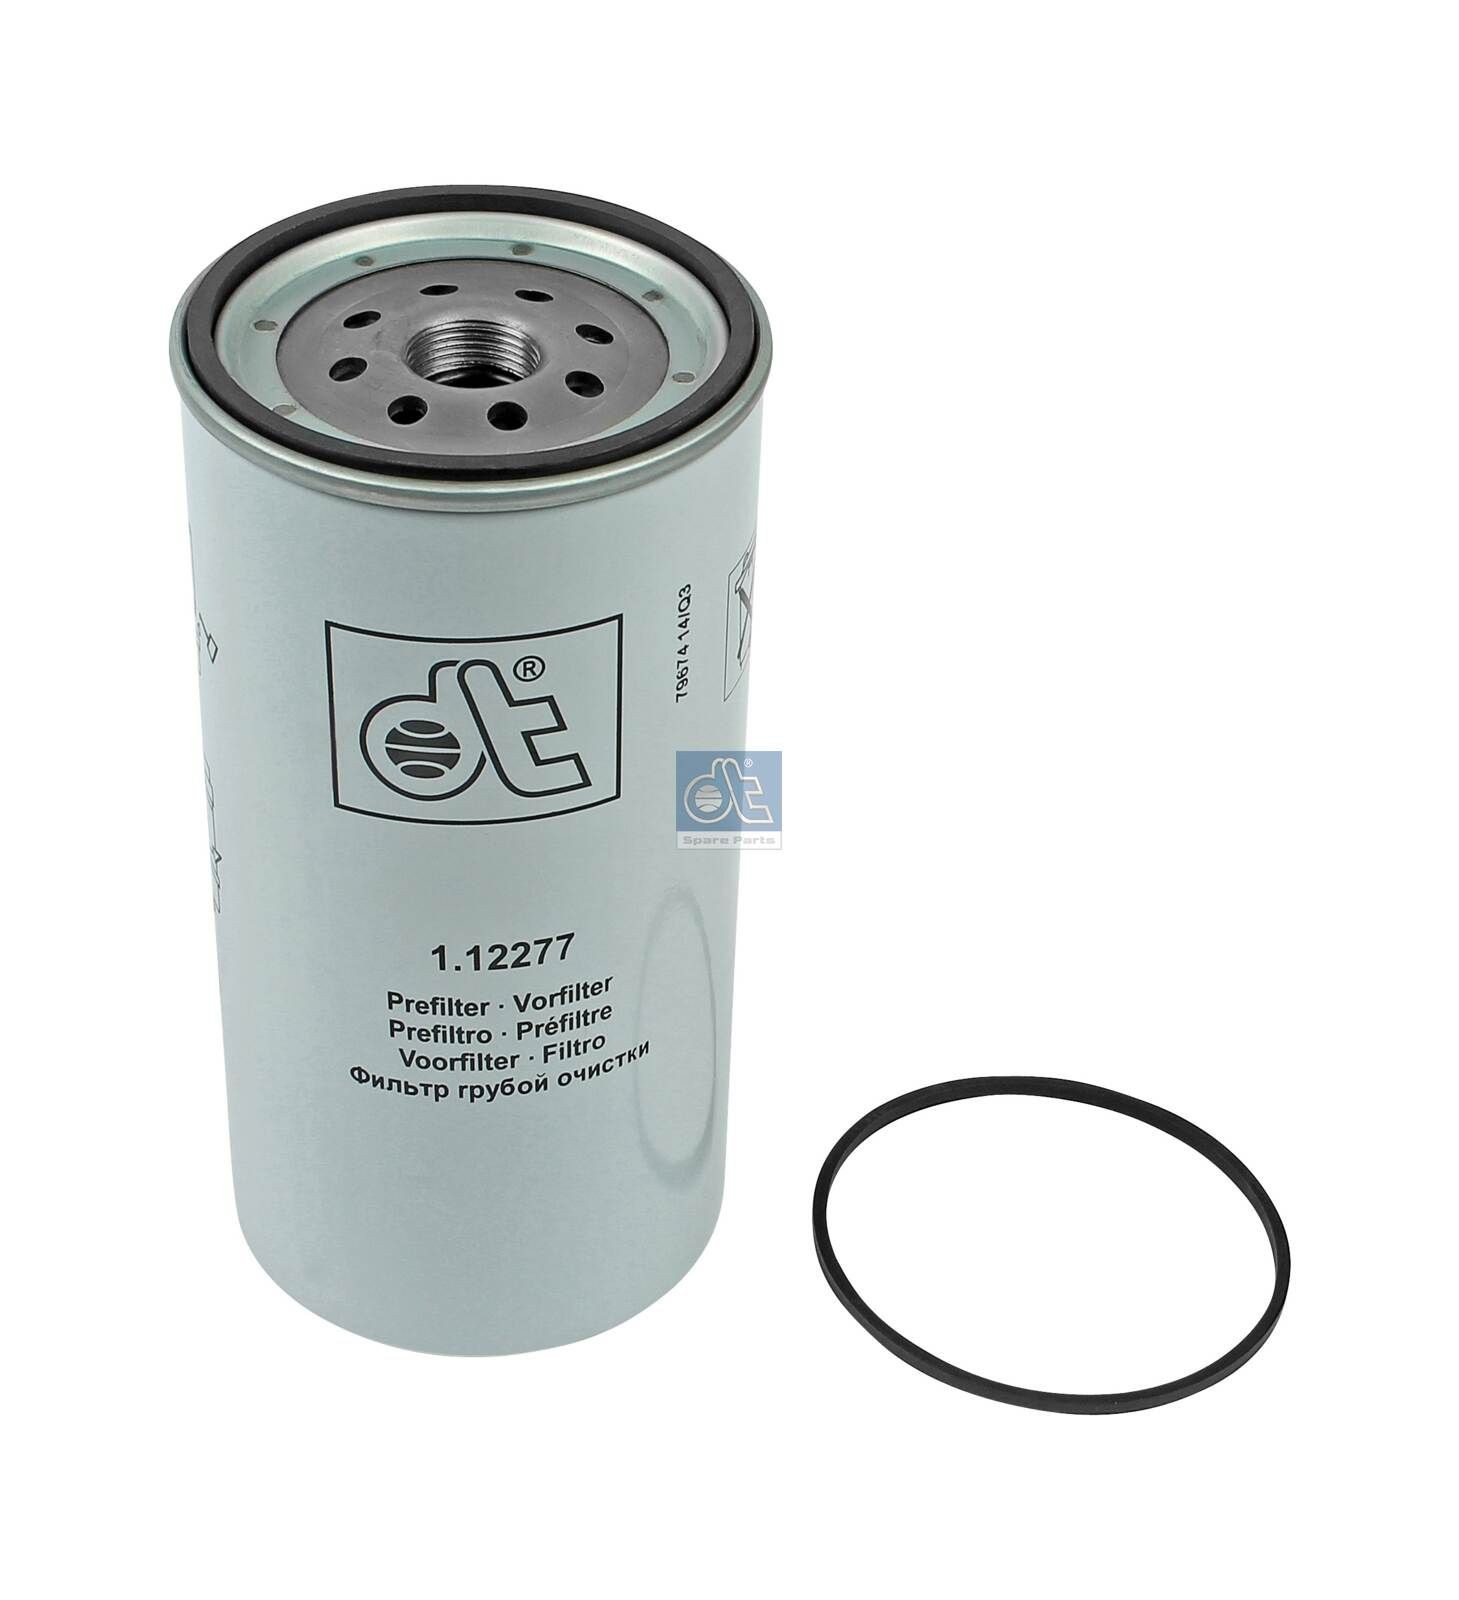 WK 1080/6 x DT Spare Parts 1.12277 Fuel filter 5 0414 2827